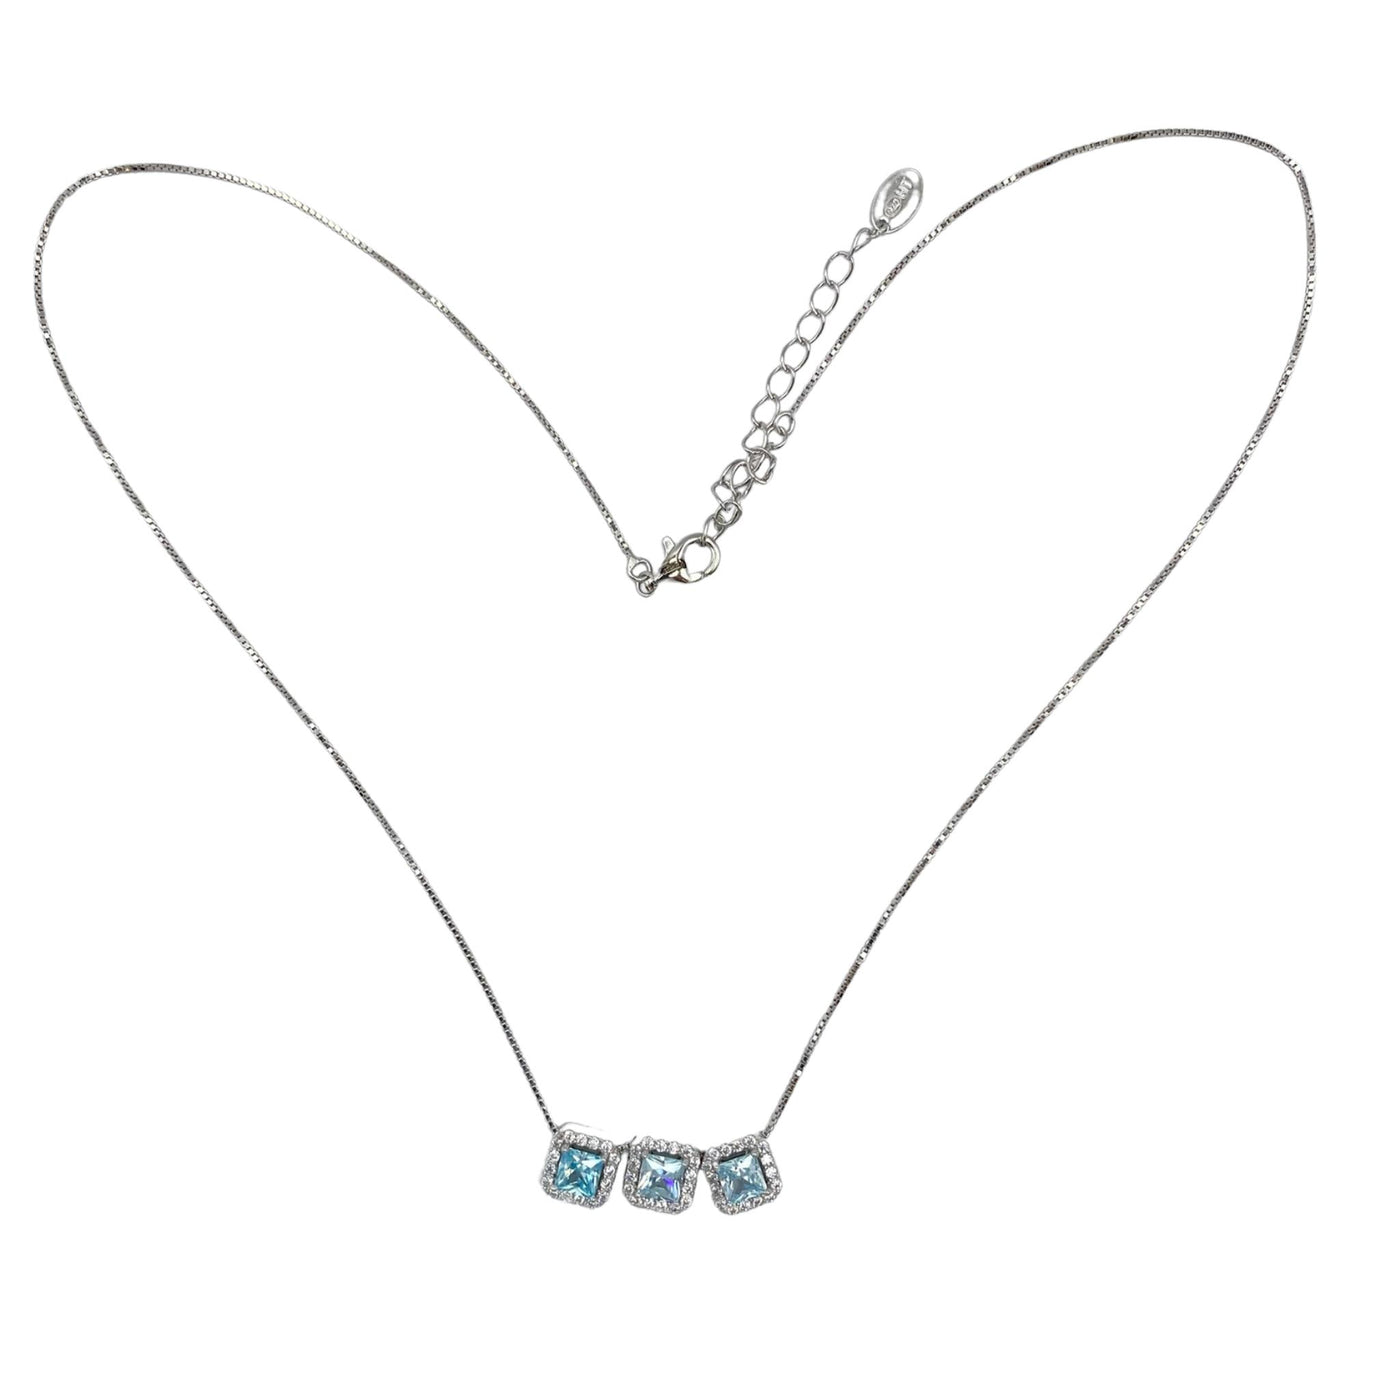 Silver necklace with trilogy carrè stone charm - rhodium